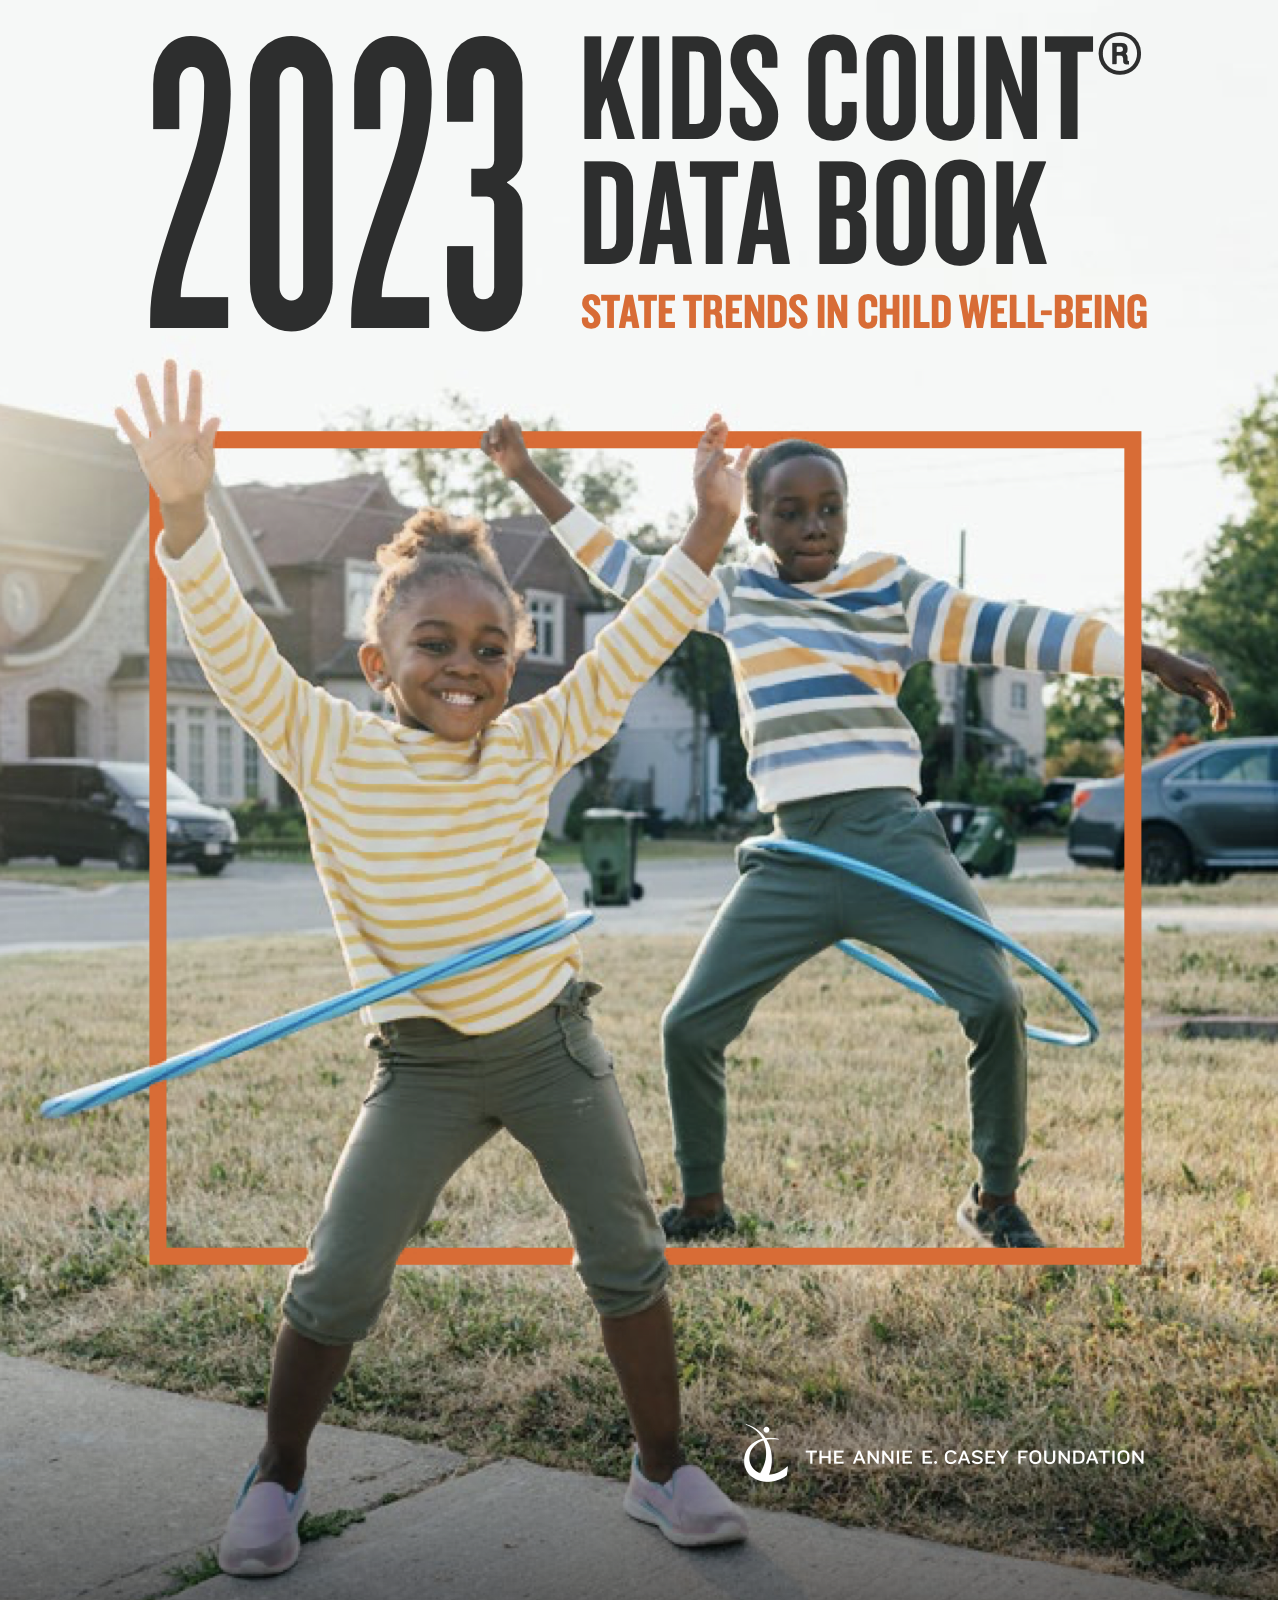 The Annie E. Casey Foundation has released its 2023 Kids Count Data Book, a 50-state report of recent household data analyzing how children and families are faring. The St. Croix Foundation for Community Development will release the USVI’s 2023 Data Book in December. (Image courtesy Annie E. Casey Foundation)